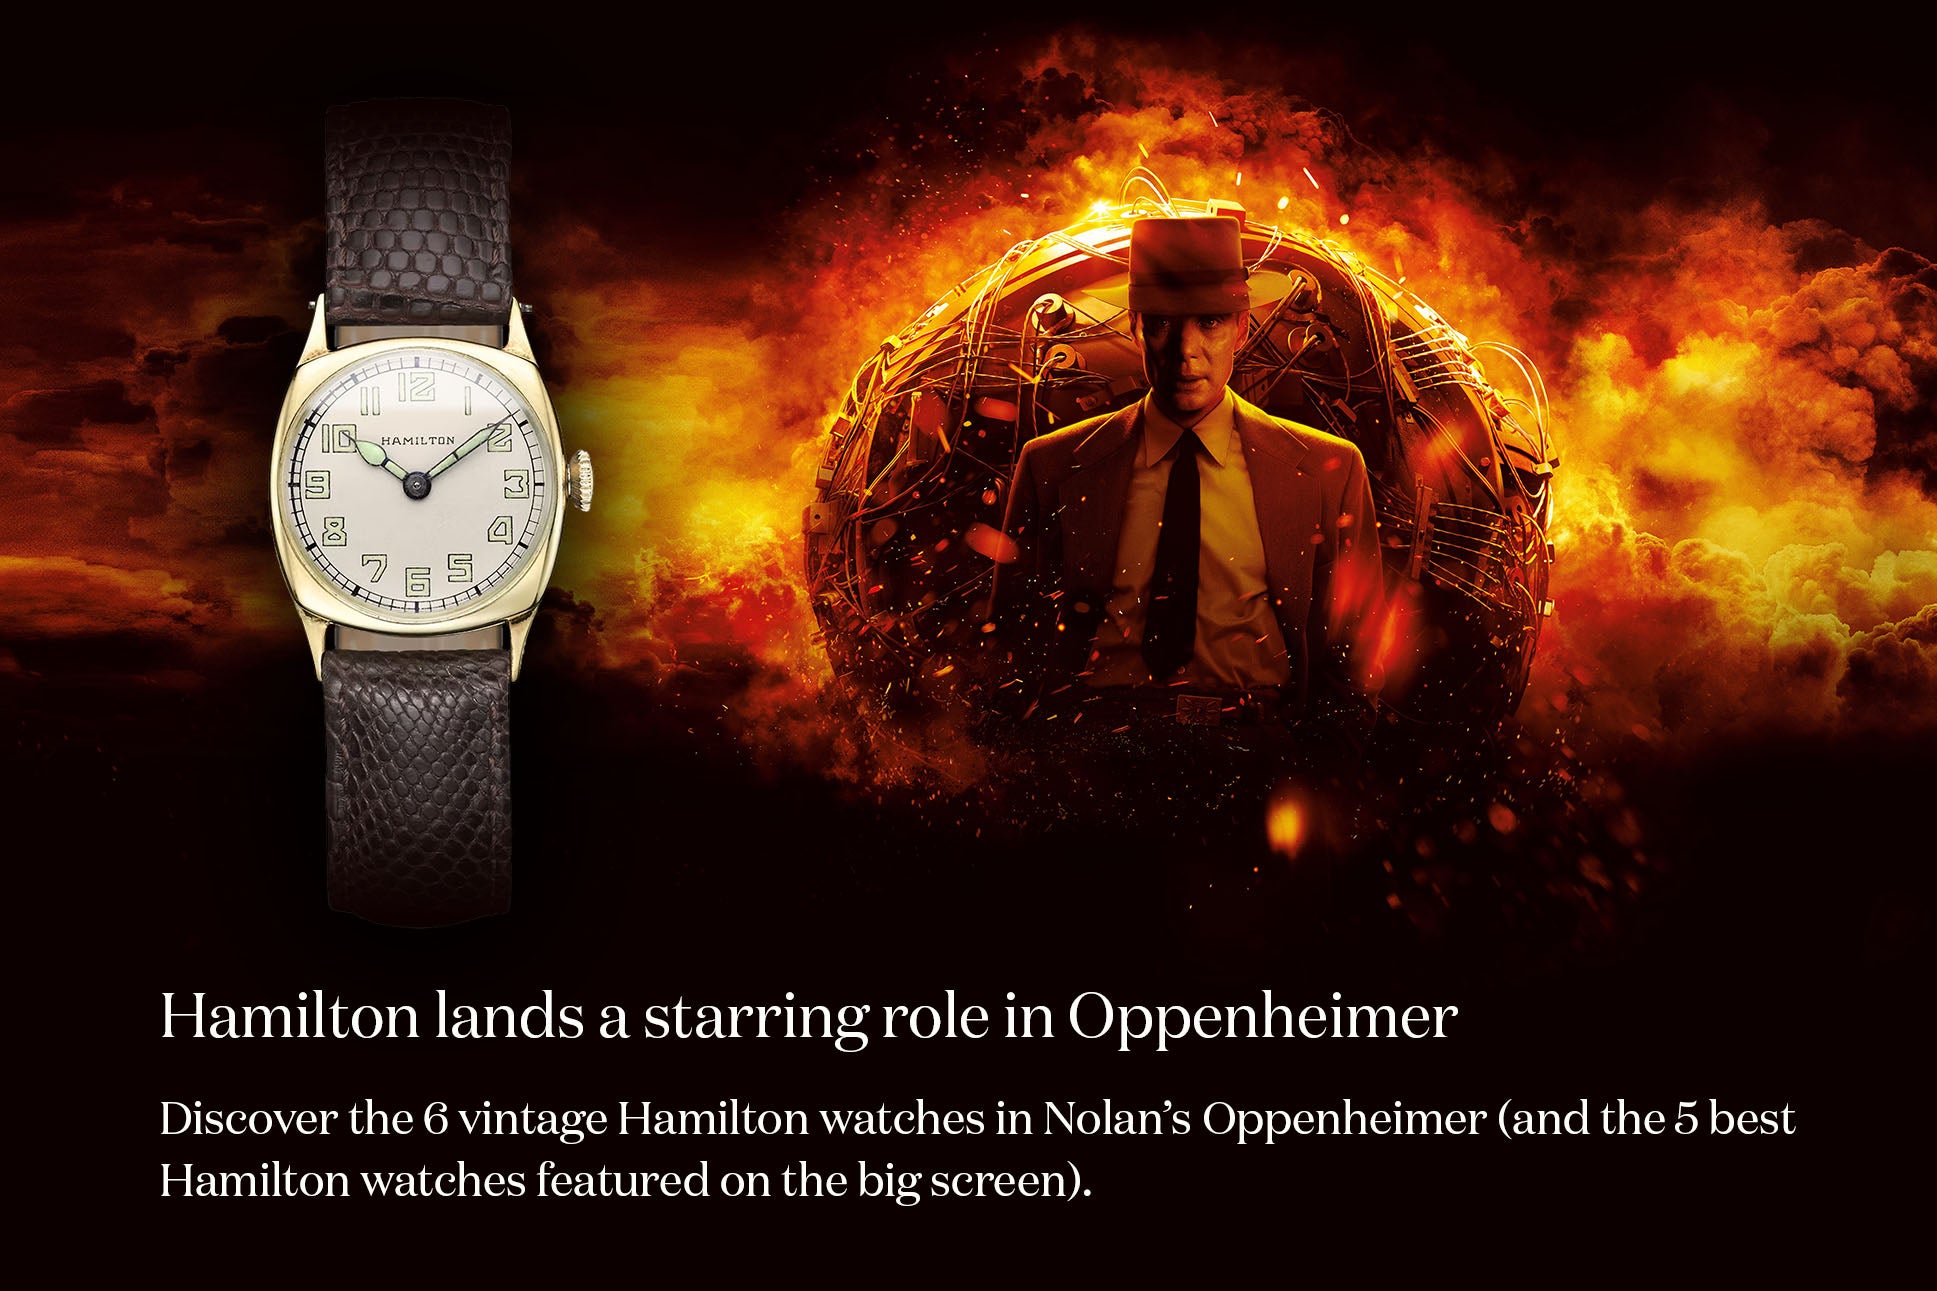 Hamilton Lands a Starring Role in Oppenheimer - 5 Best Hamilton Watches